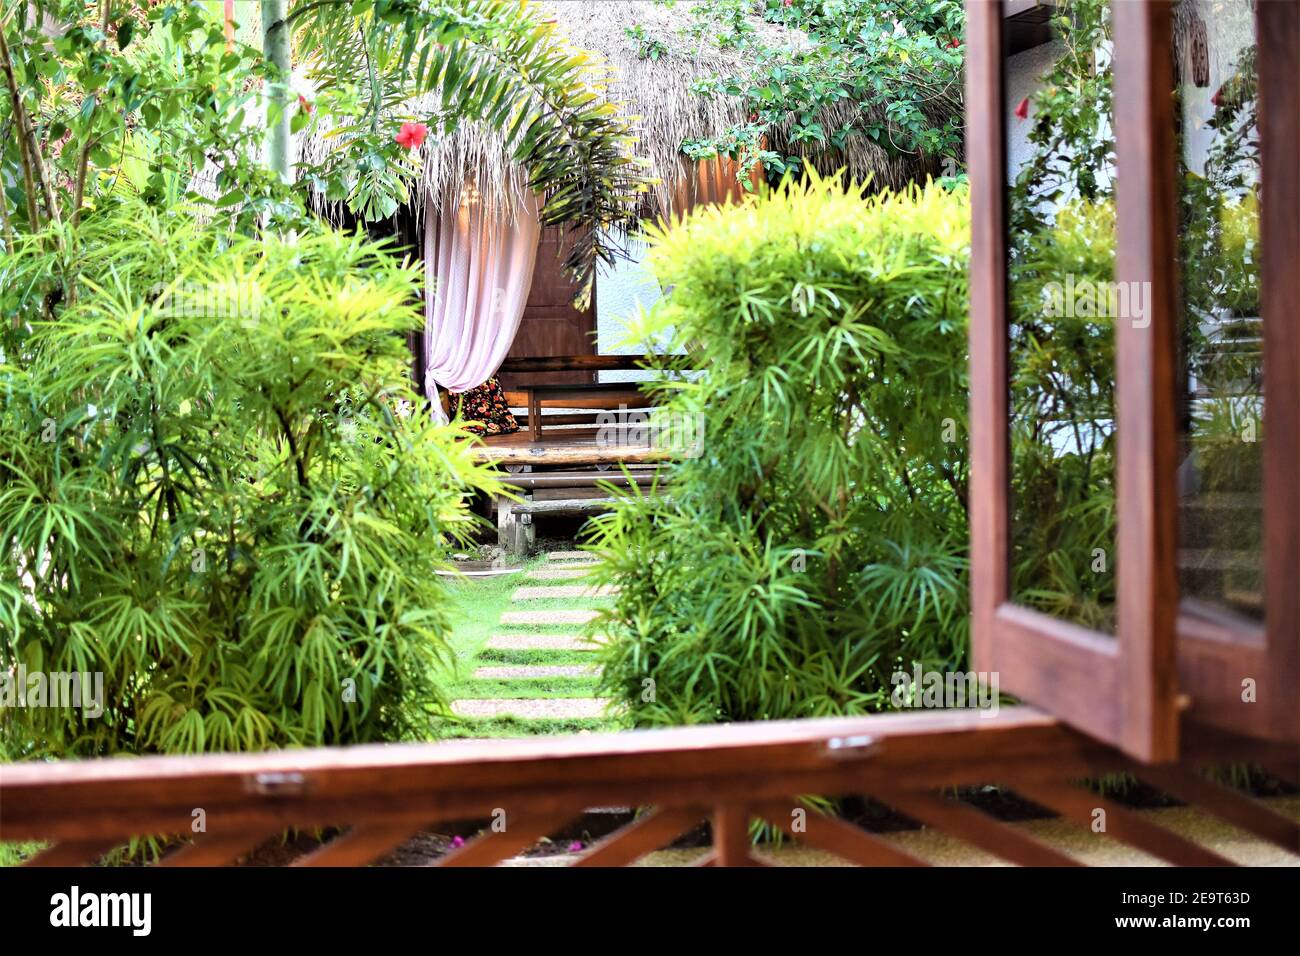 A curtained bamboo garden cabana with a nipa roof can be seen from an open house window Stock Photo